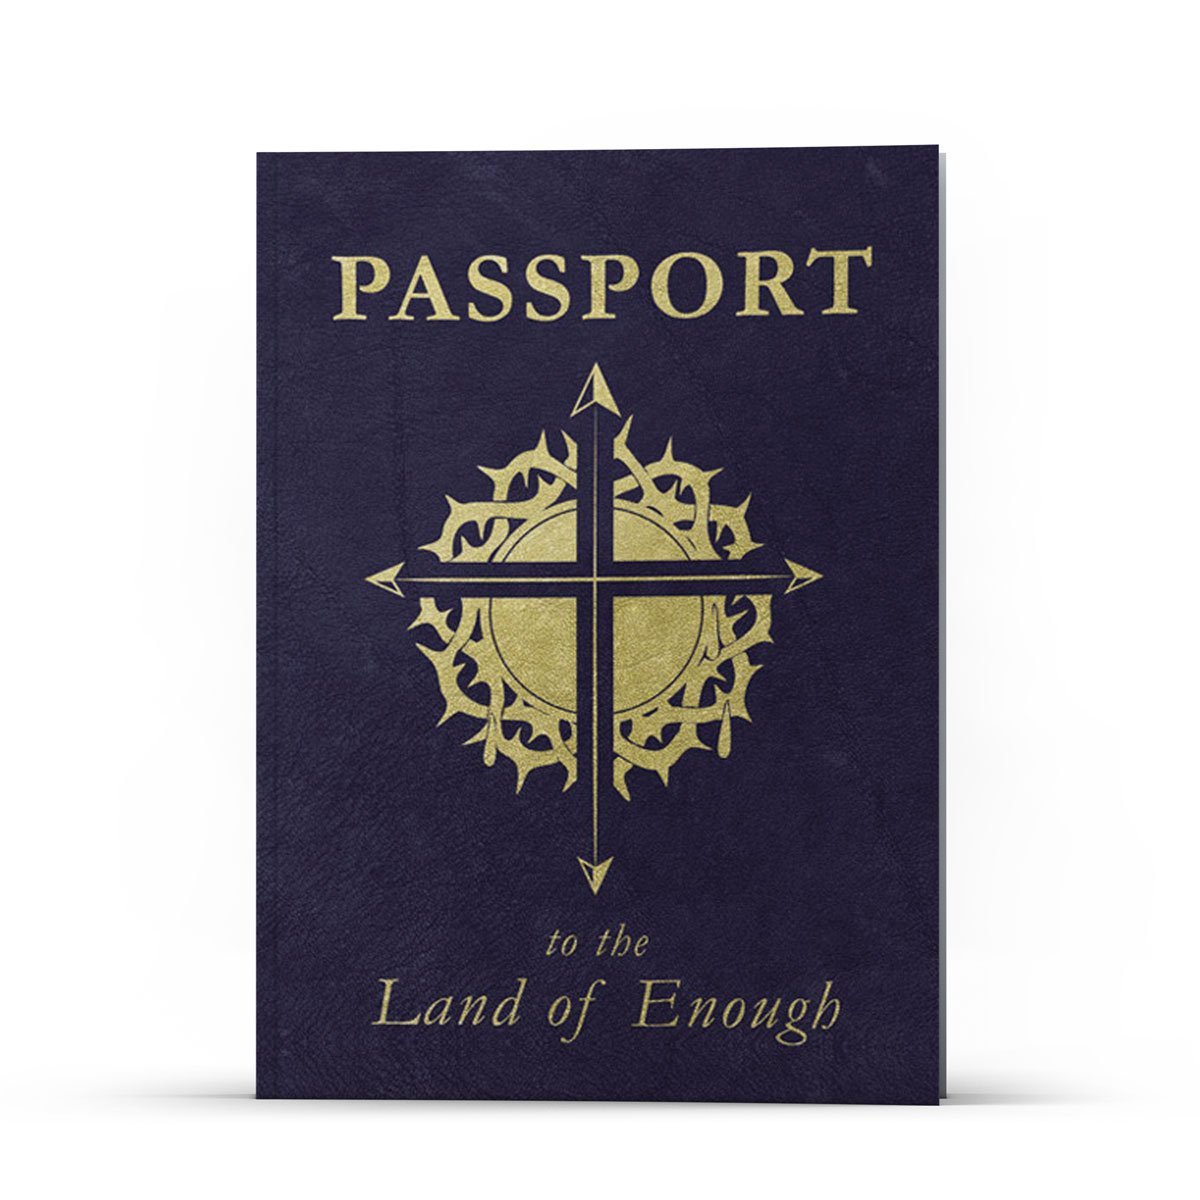 Passport to the Land of Enough - Illumination Publishers